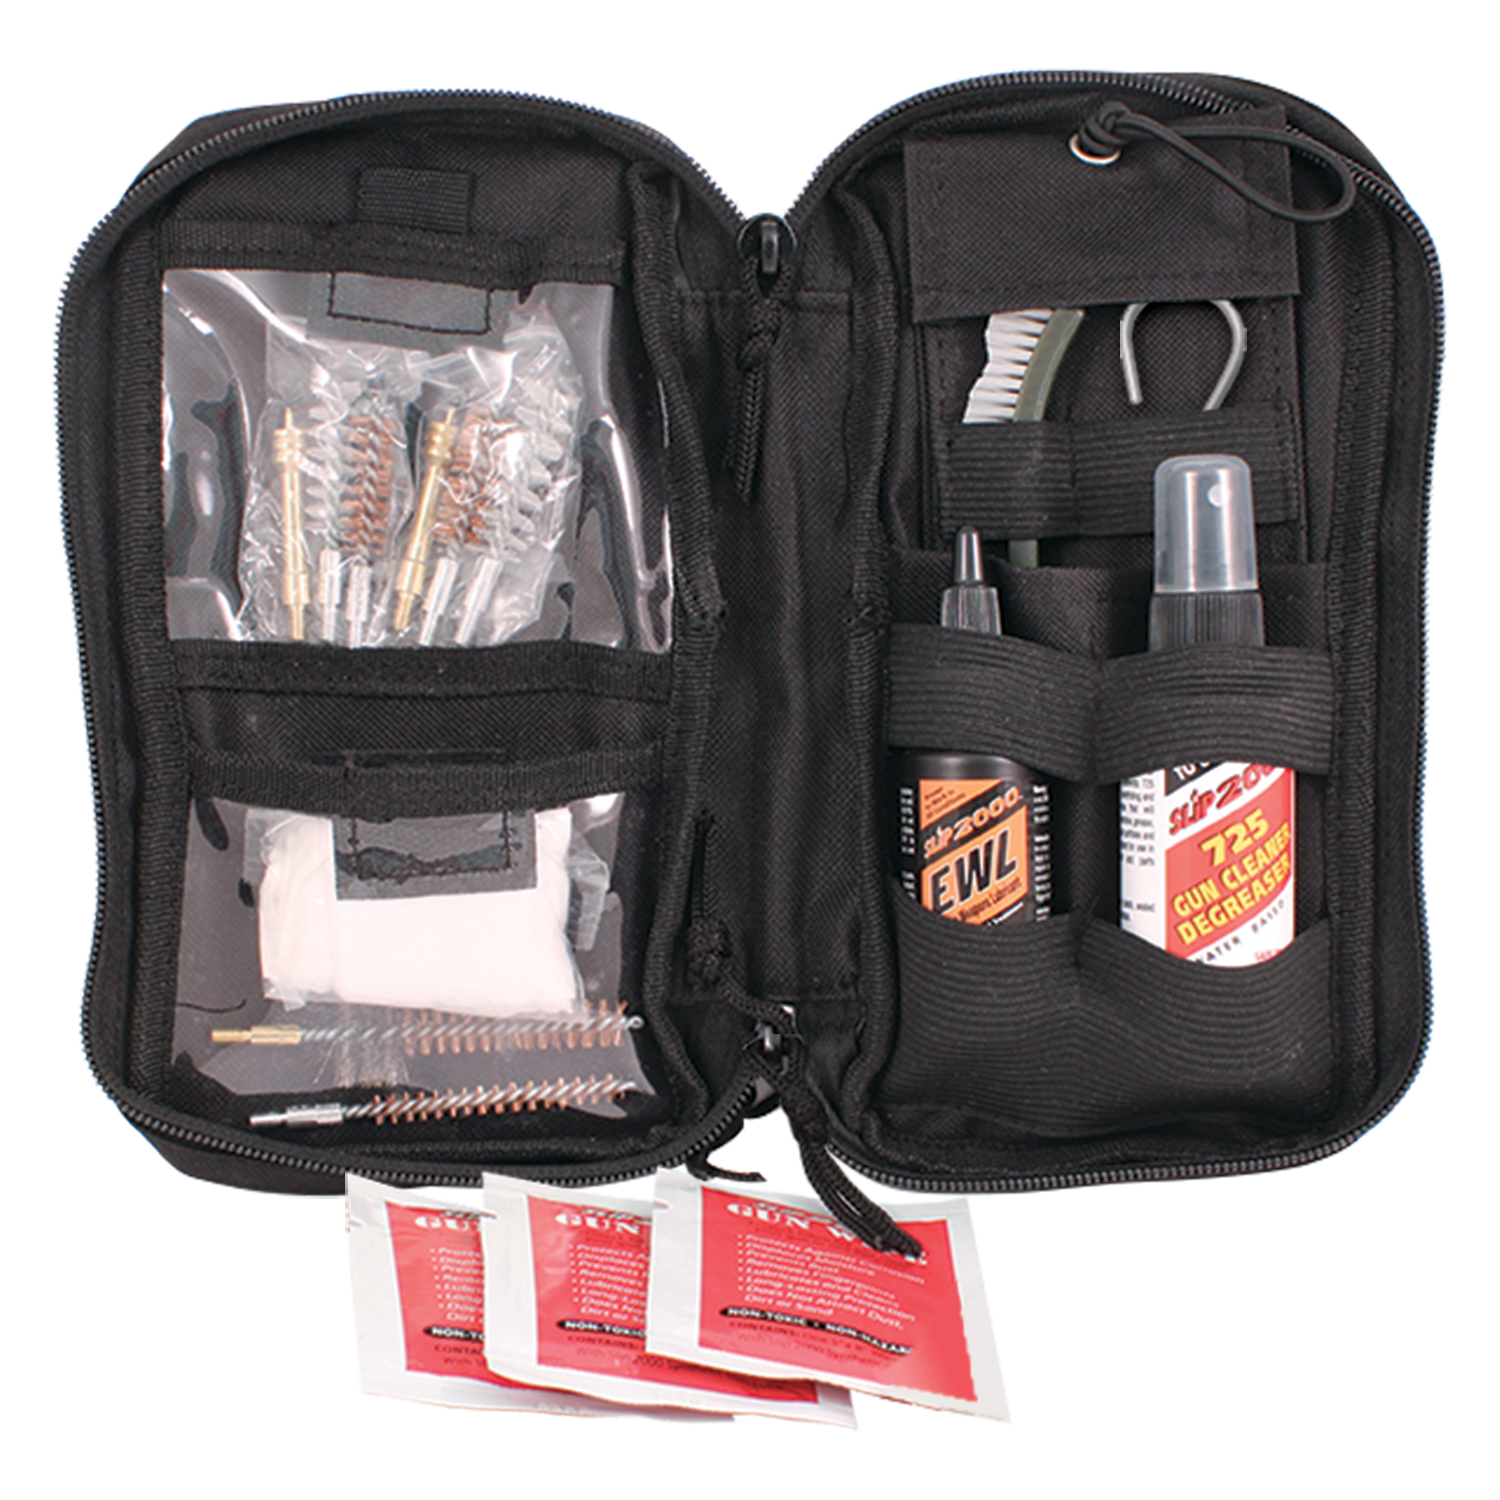 LOW STOCK - Law Enforcement Tactical Cleaning Kit - .357 / 9mm / .40 / .223 Cal